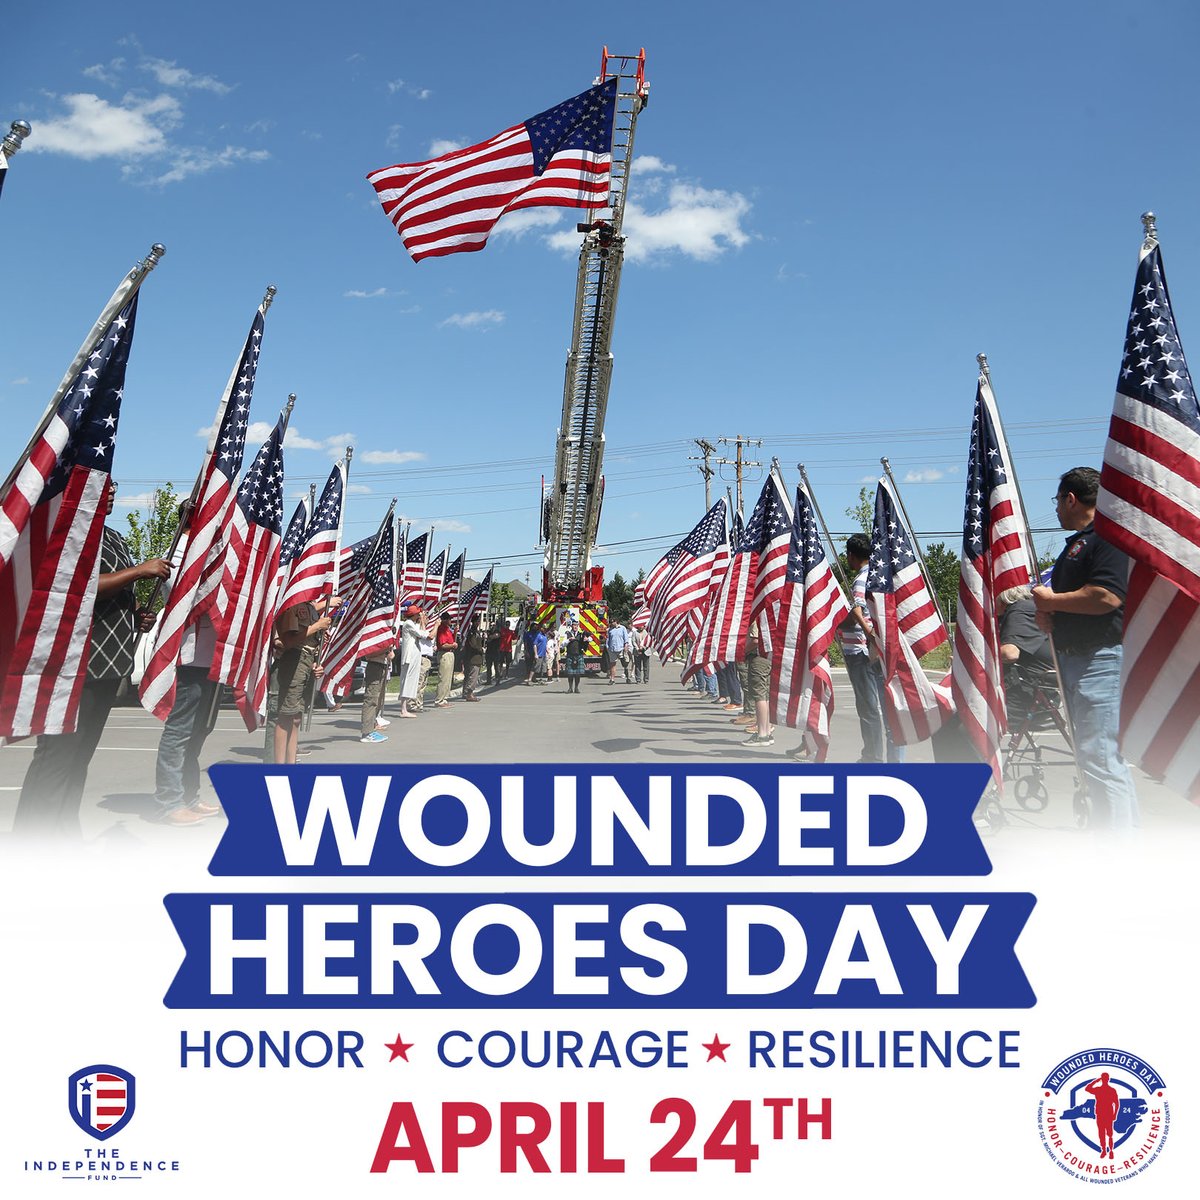 Join us as we celebrate the 4th annual Wounded Heroes Day in North Carolina. This date honors Sgt. Michael Verardo of Union County, who was severely wounded in Afghanistan on April 24, 2010. The courage and bravery of all of our wounded veterans is an inspiration to our state